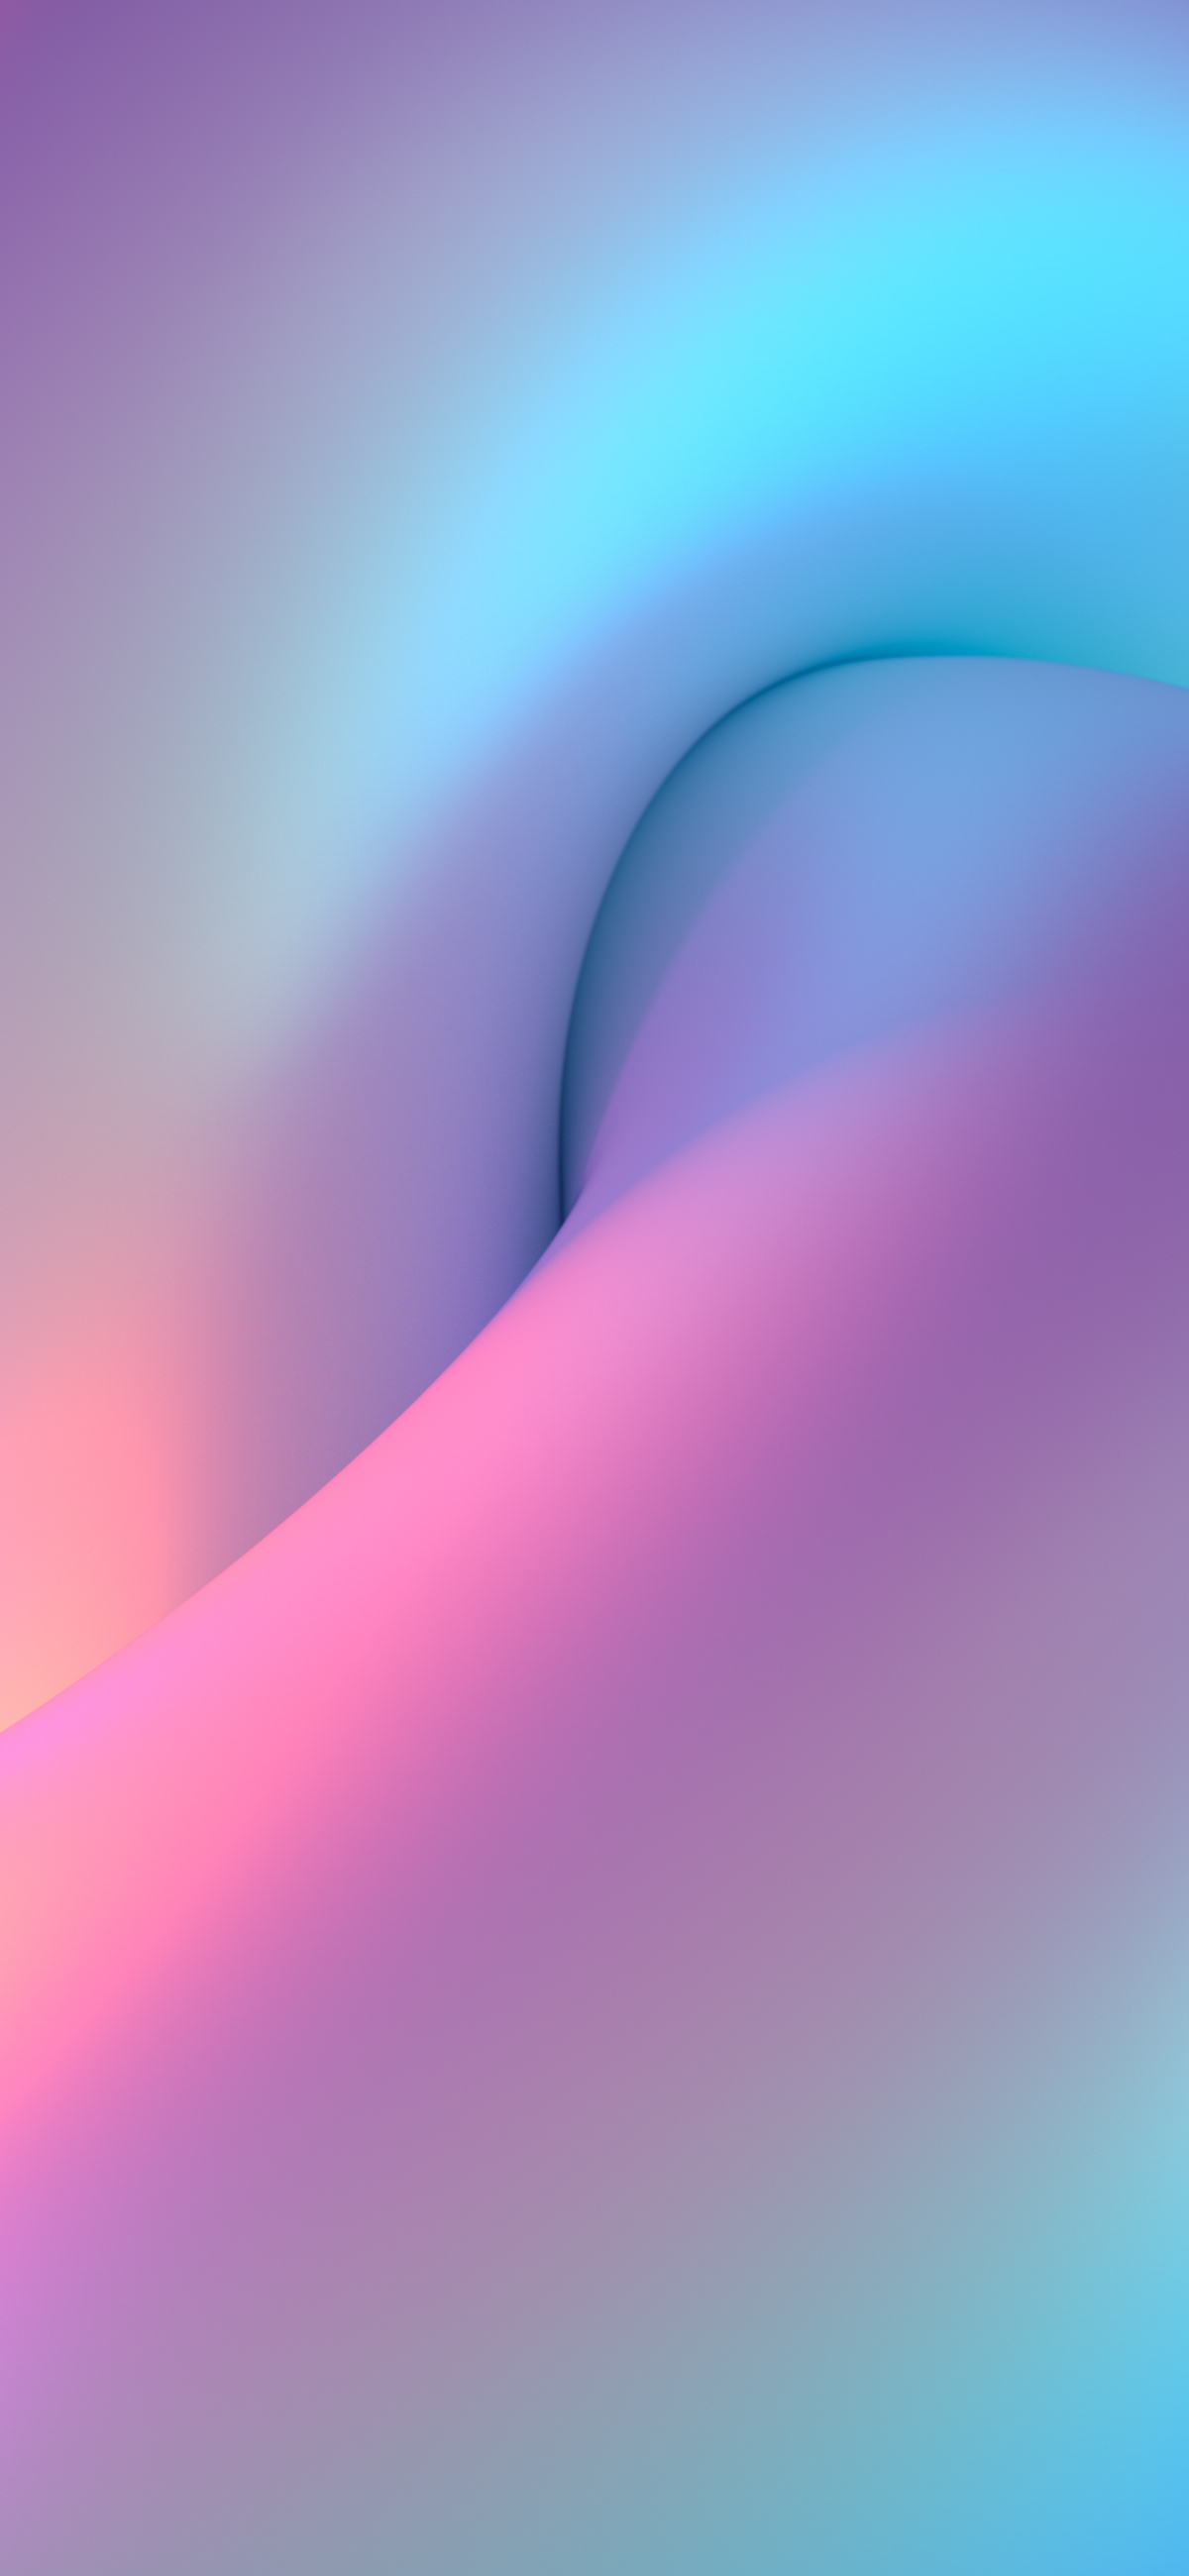 Abstract iPhone Wallpapers Created by Facebook's Design ...